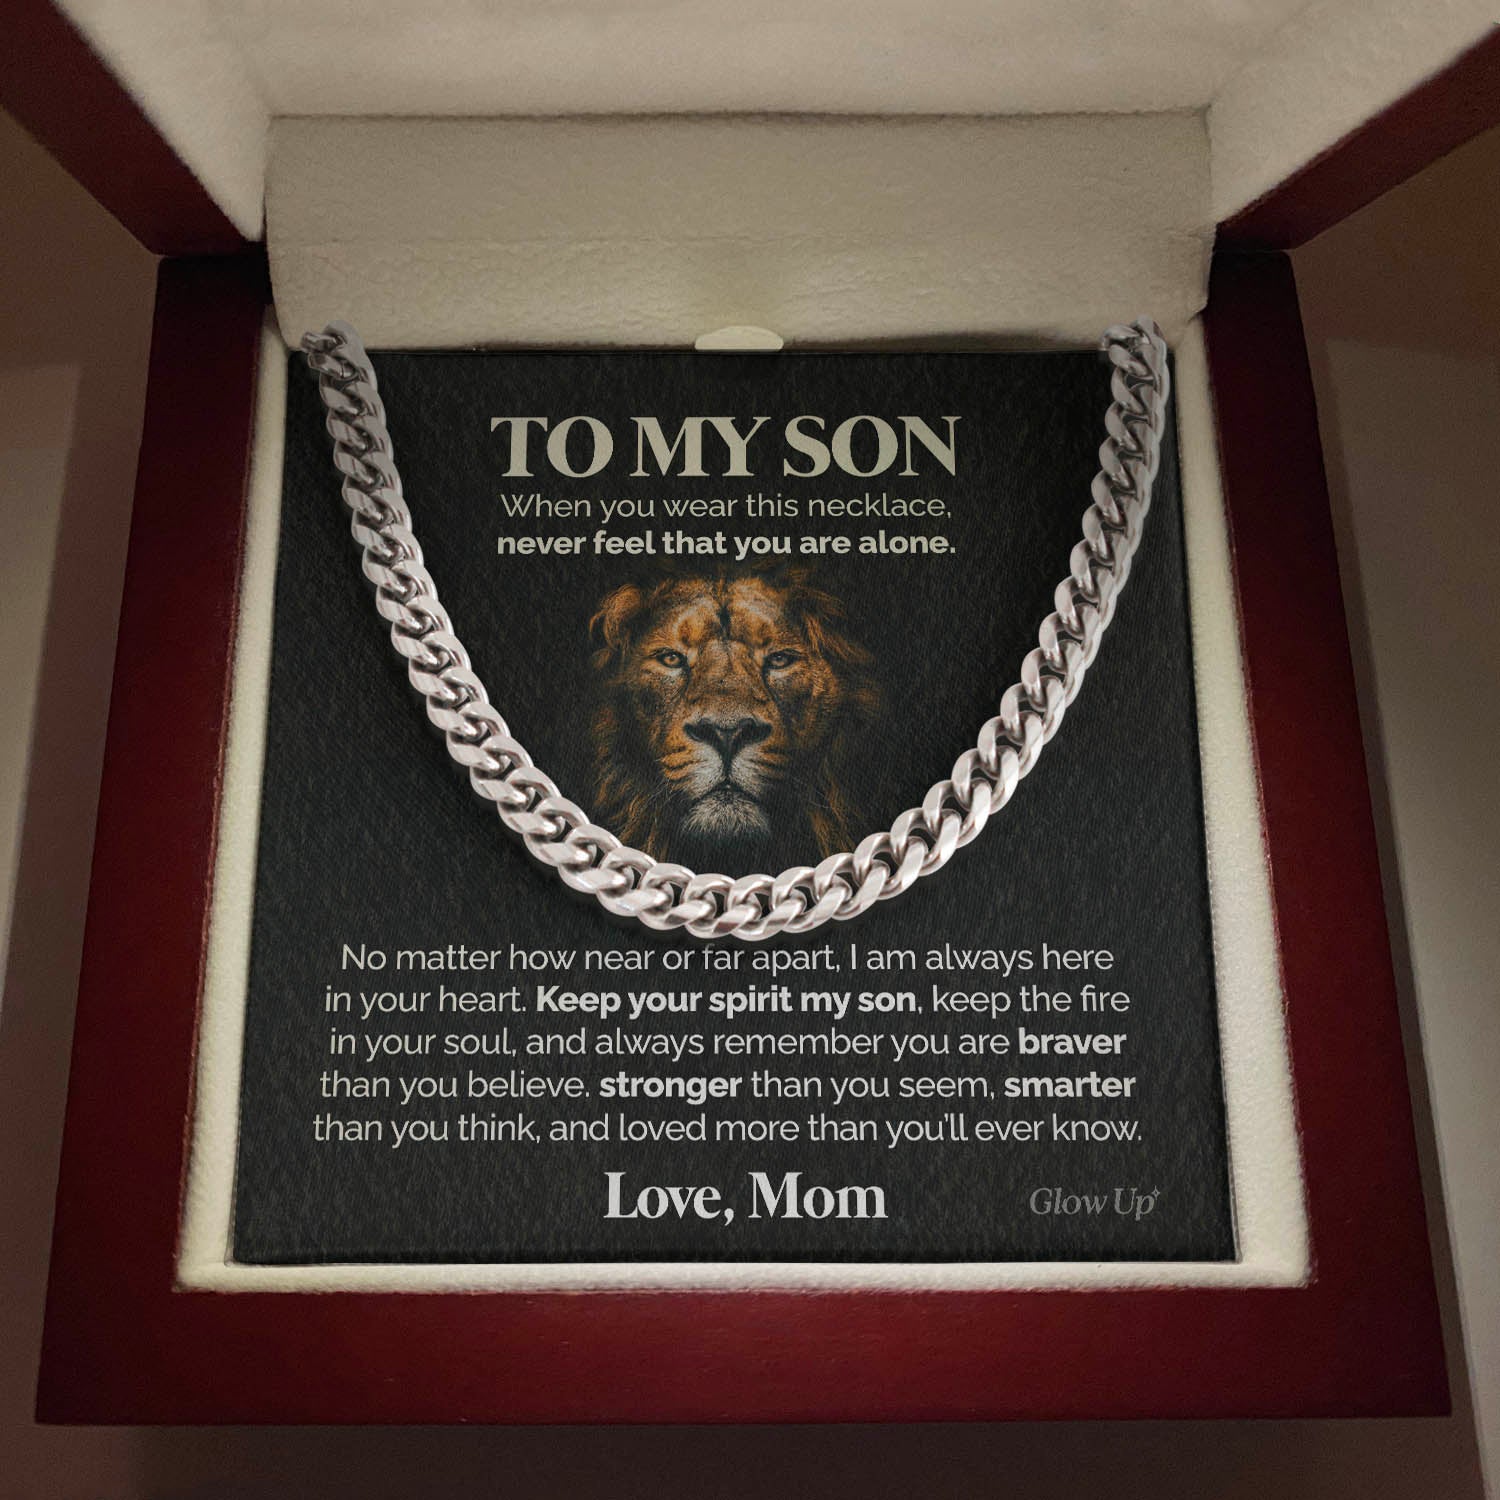 ShineOn Fulfillment Jewelry Stainless Steel / Luxury Box To my Son - Keep your spirit my son - Cuban Link Chain